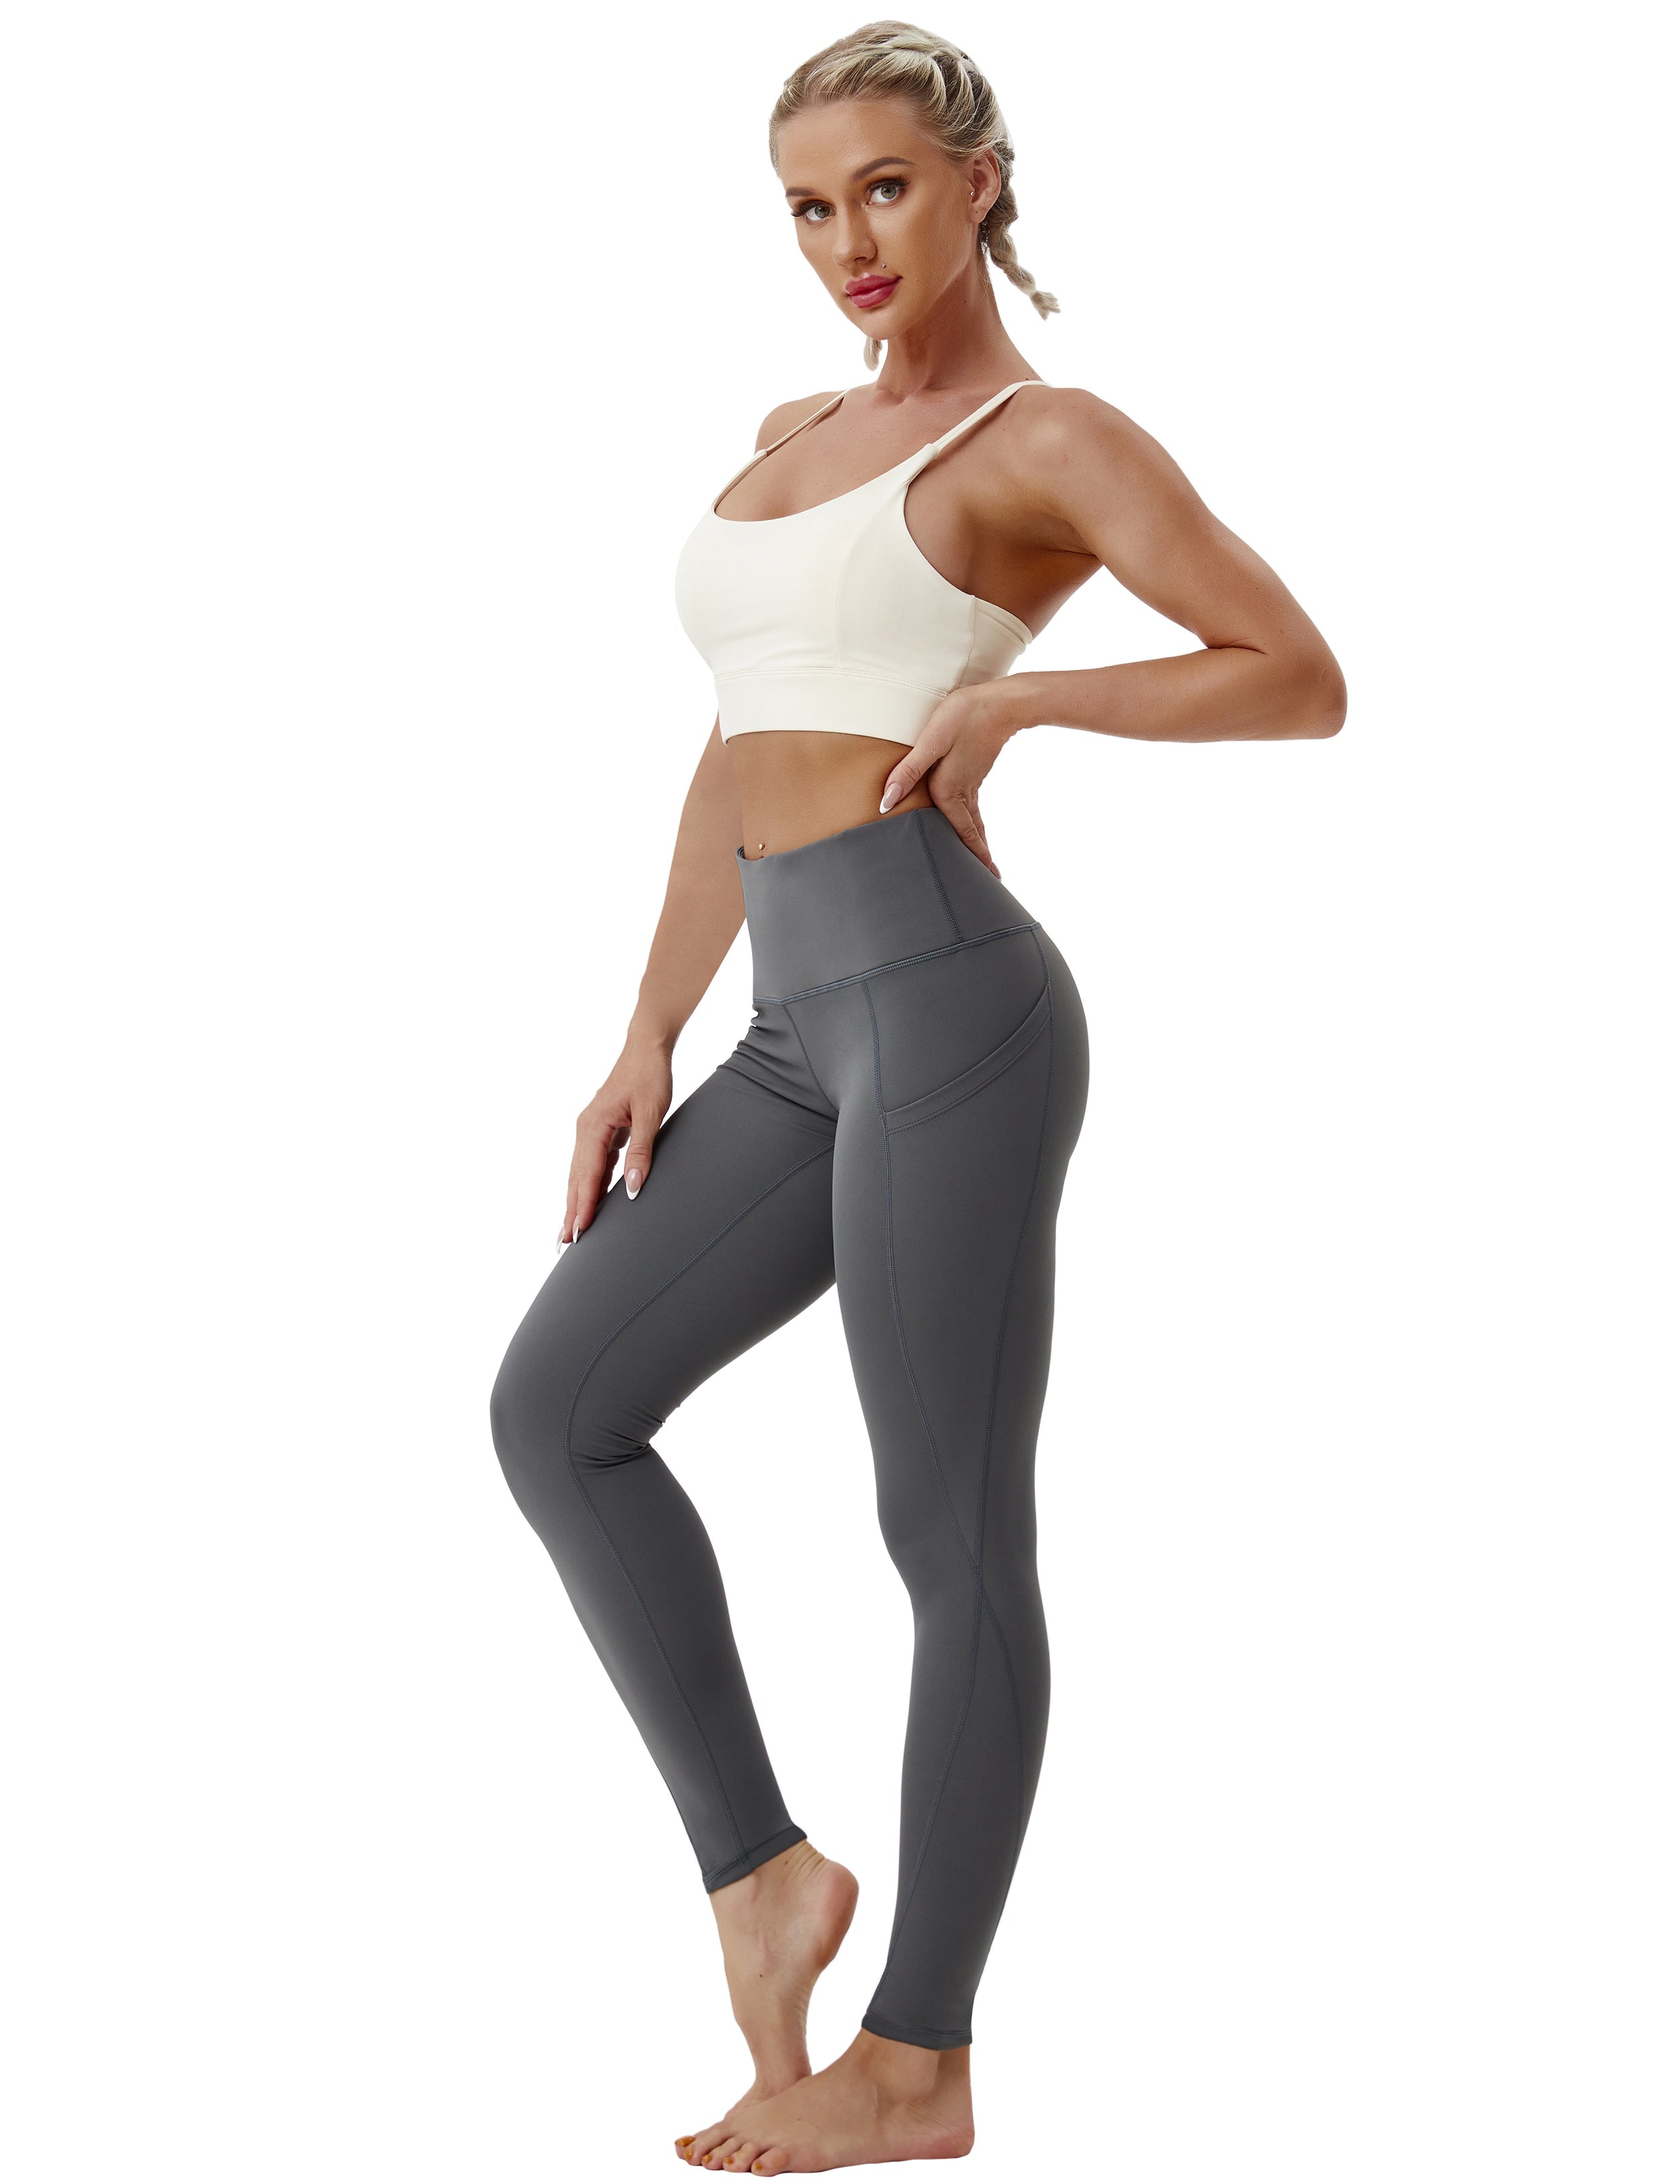 High Waist Side Pockets Golf Pants shadowcharcoal 75% Nylon, 25% Spandex Fabric doesn't attract lint easily 4-way stretch No see-through Moisture-wicking Tummy control Inner pocket